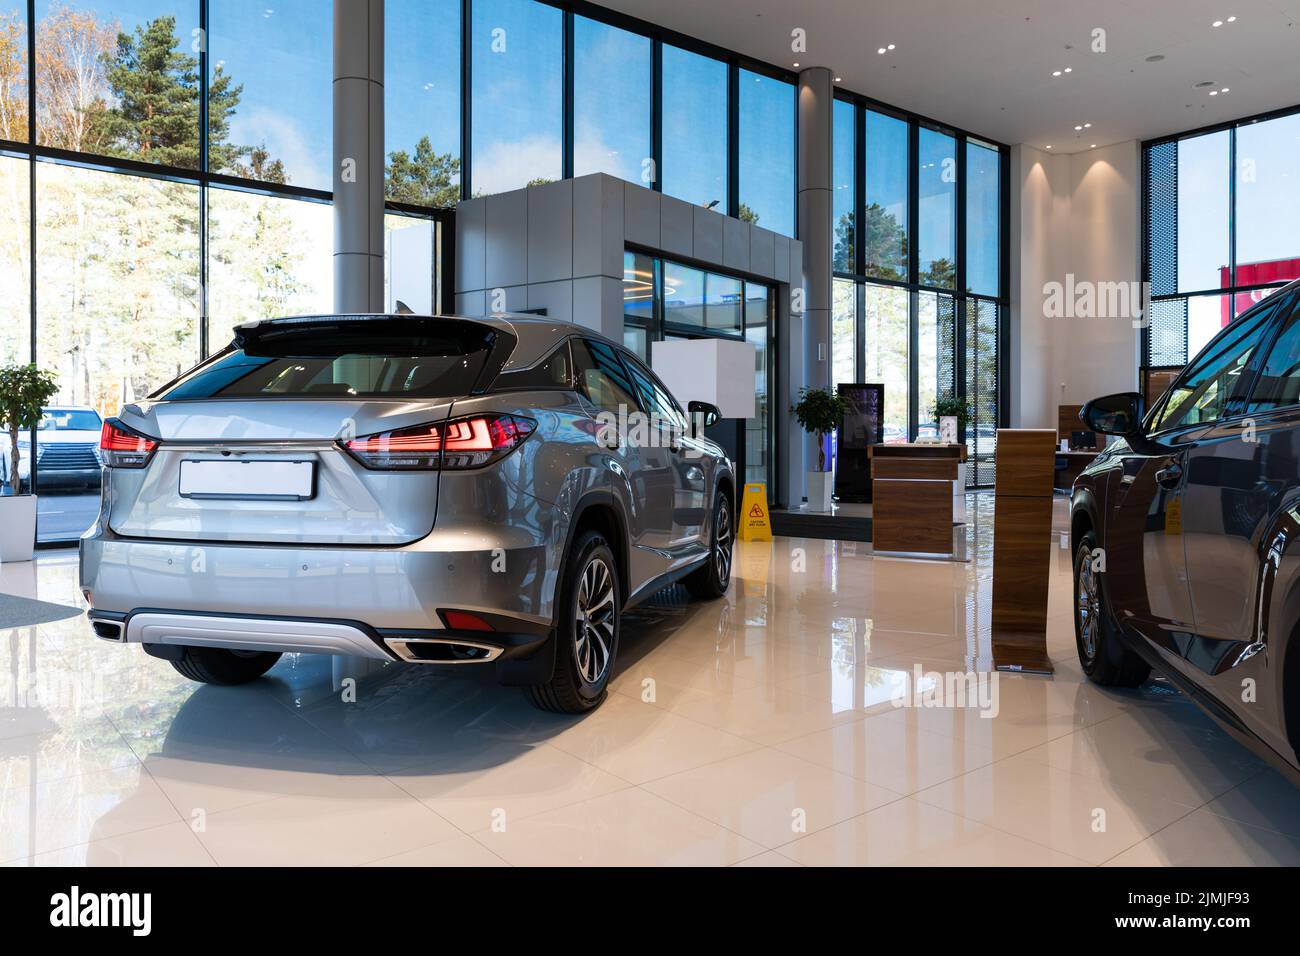 Dealership of premium cars, interior photography of a modern showroom Stock Photo